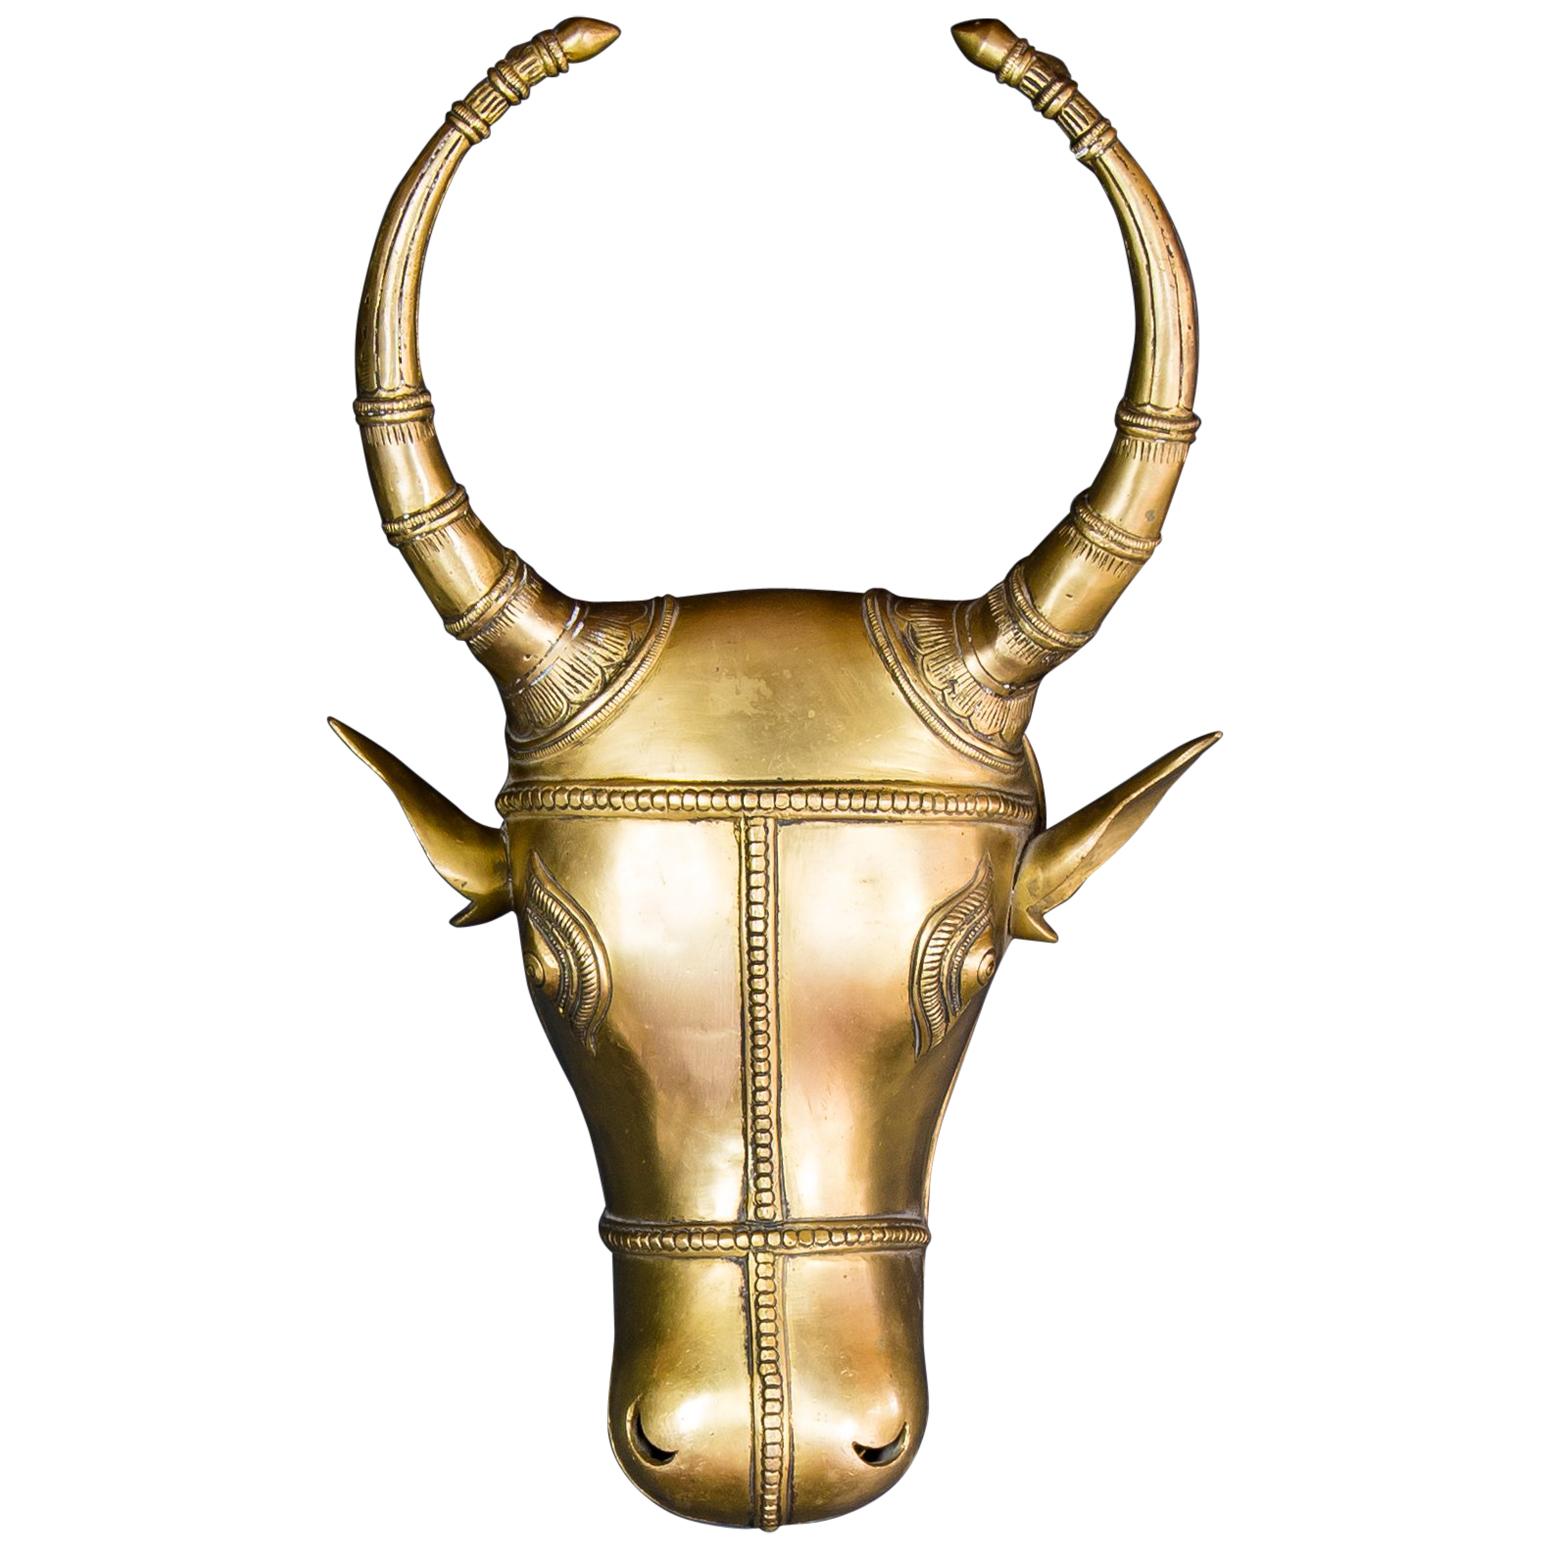 This beautiful, solid brass decorative cows head purchased in Jaipur was believed to have dated from the 19th century, handcrafted in India. Striking horns and with real character this piece is extremely heavy. There is a moulded hook to the back of